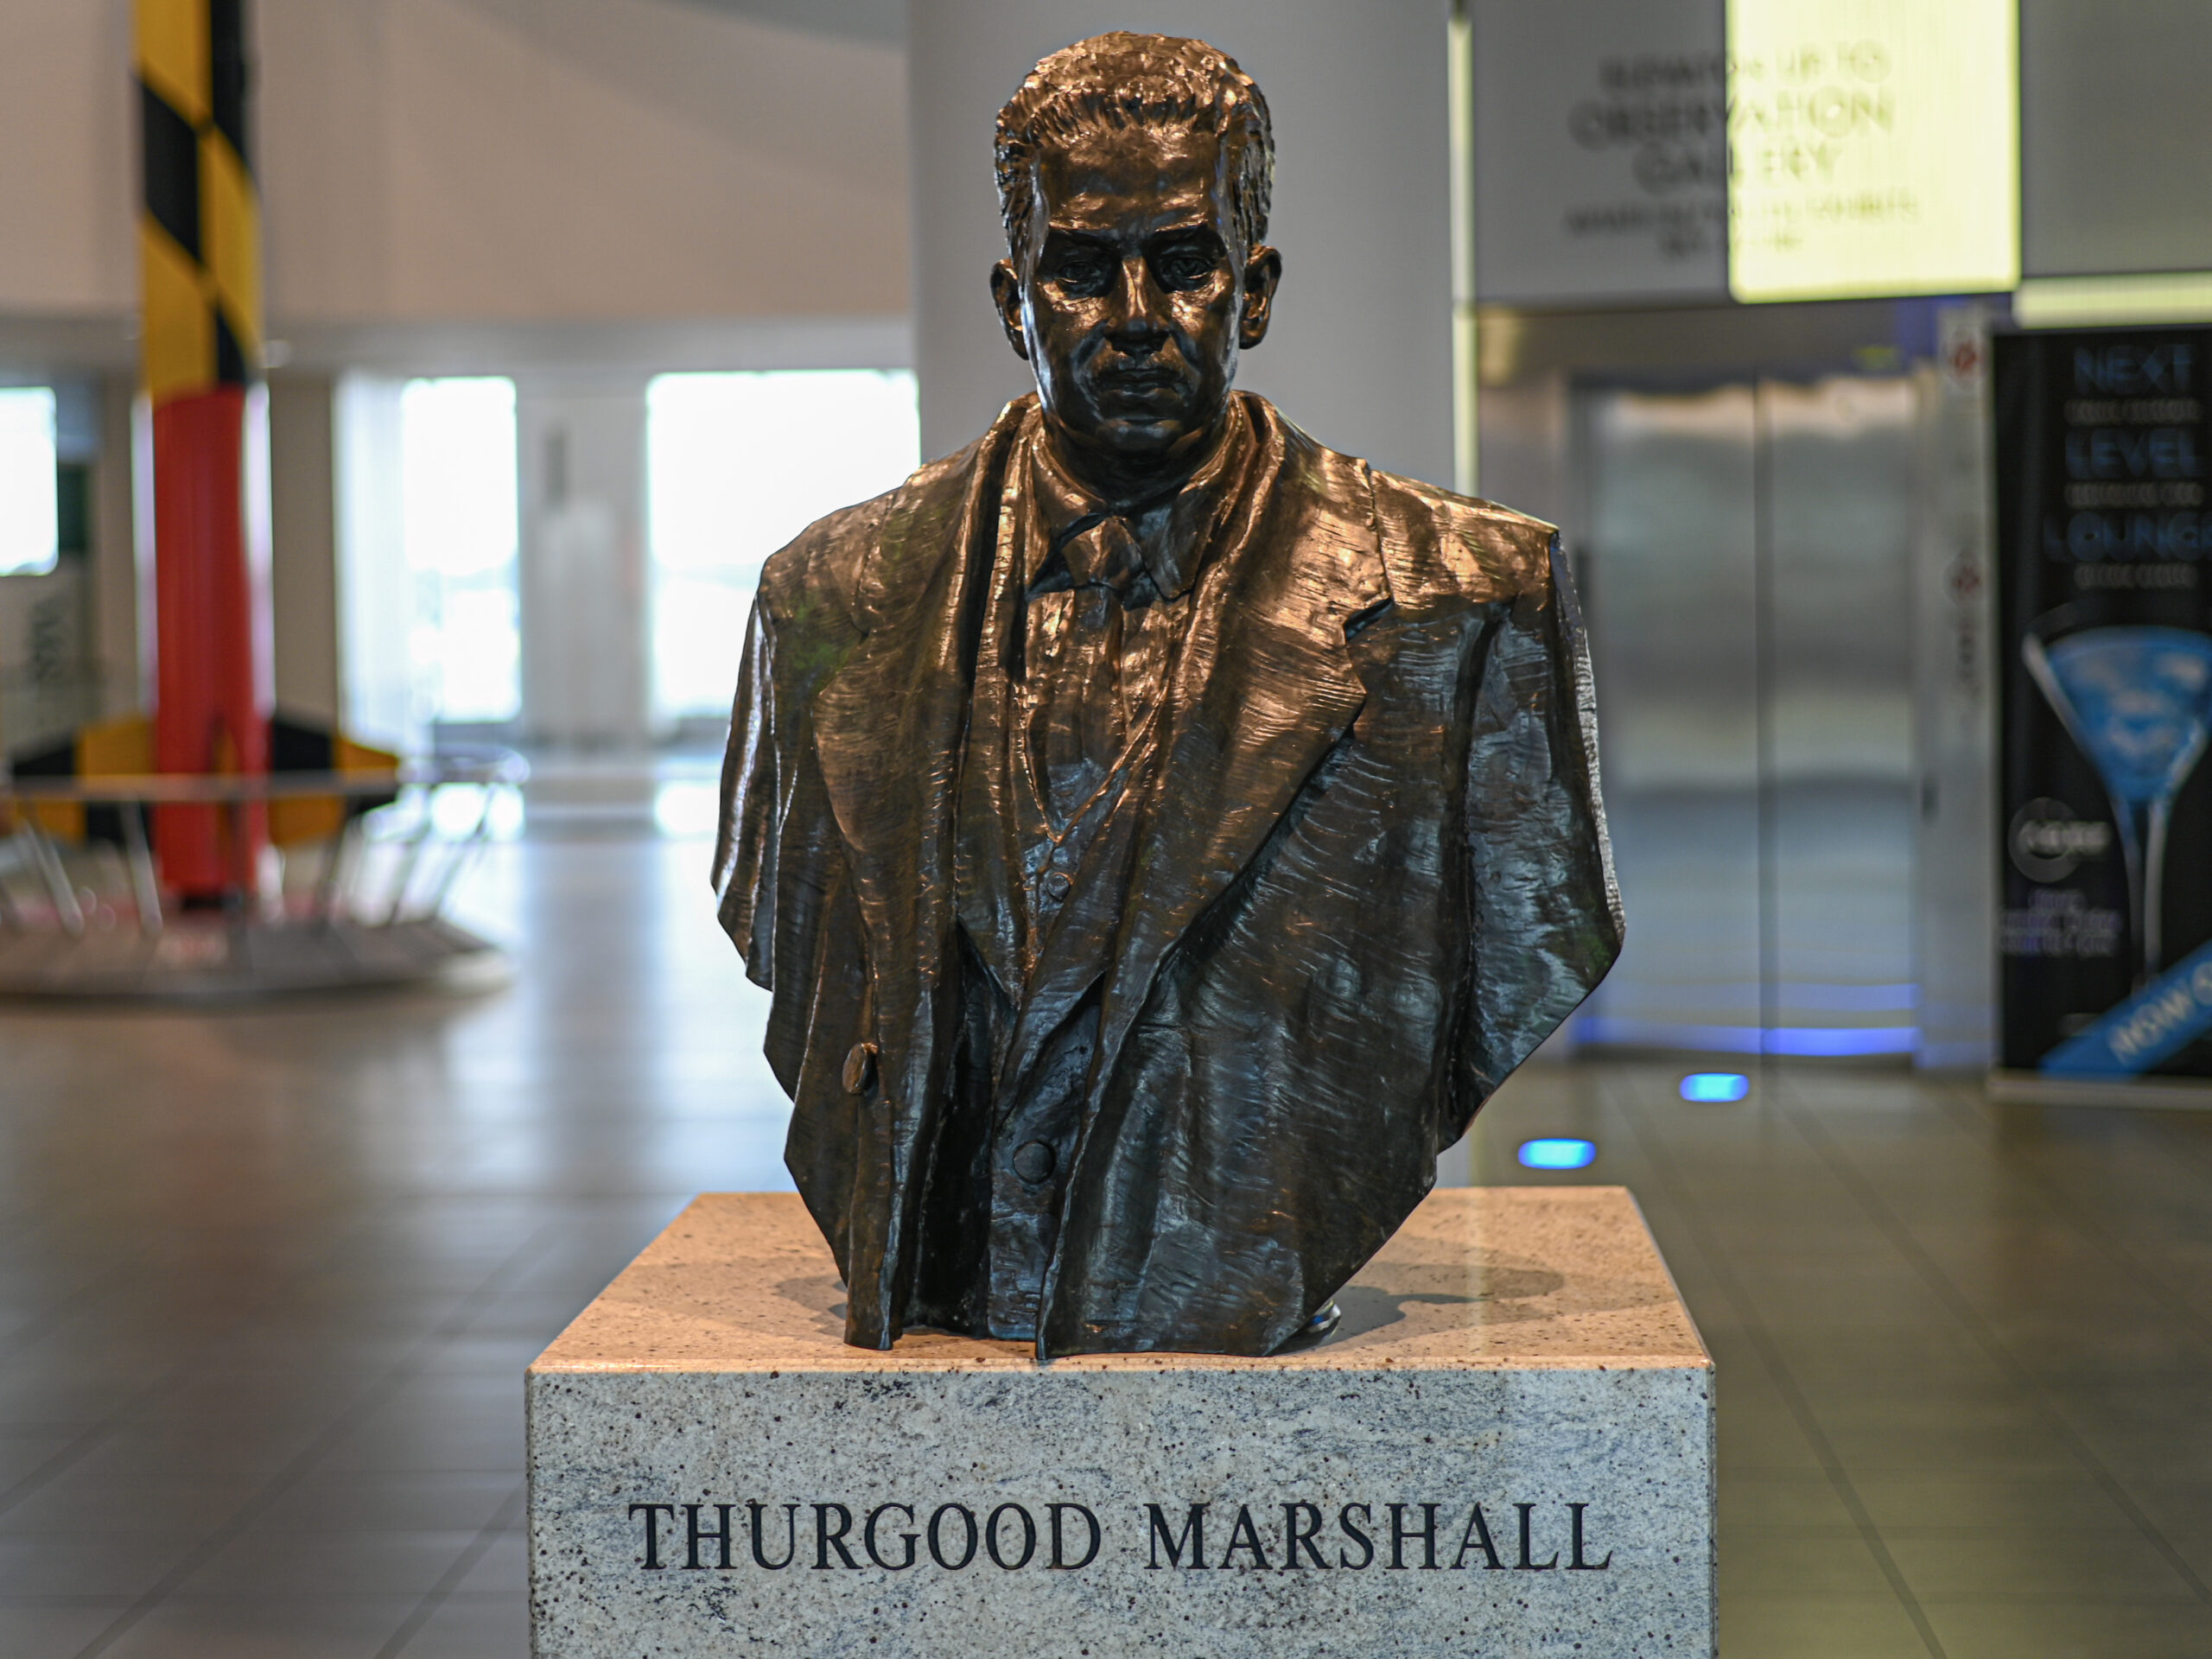 Photo of a bust of Thurgood Marshall on display at BWI Marshall Airport.